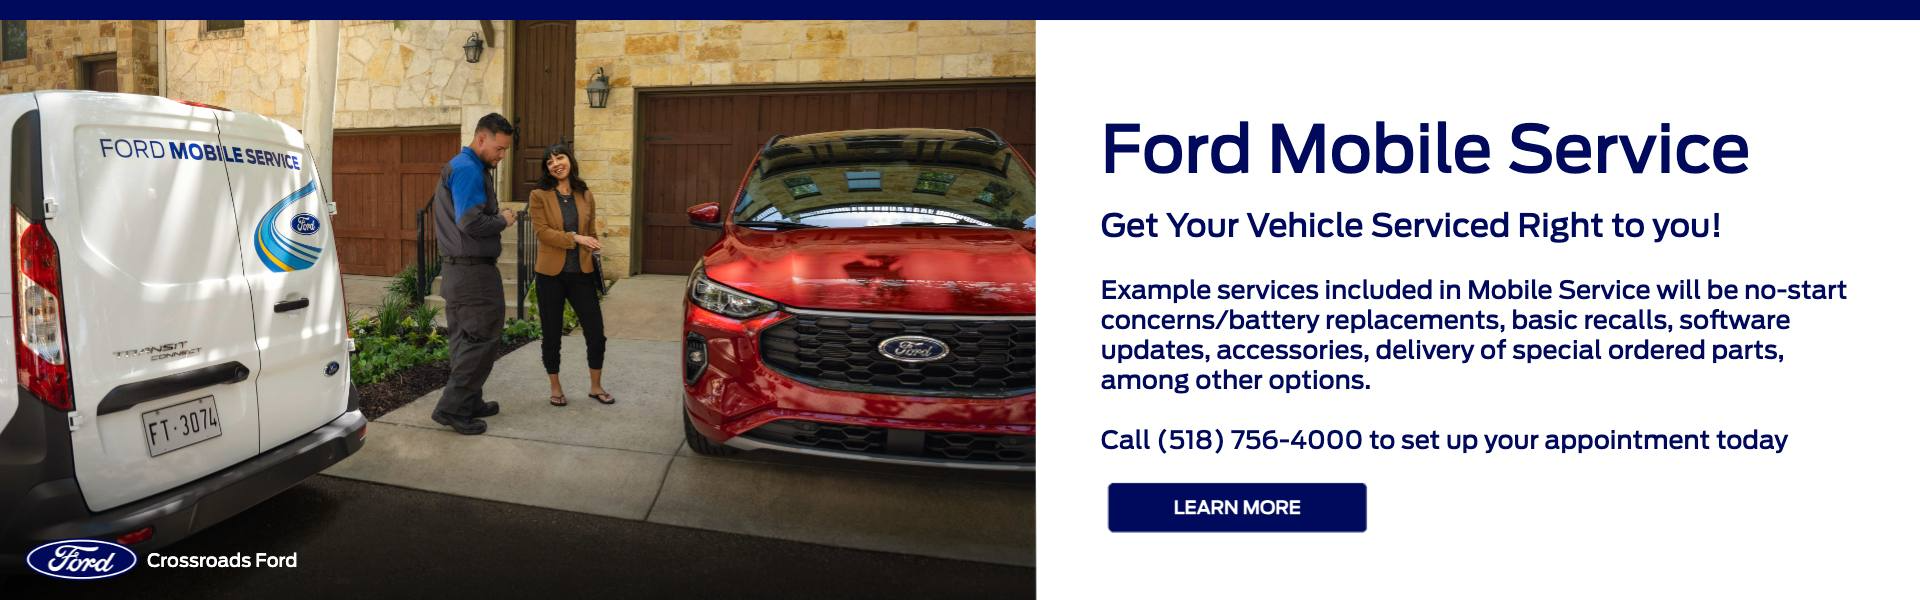 Ford Mobile Service 